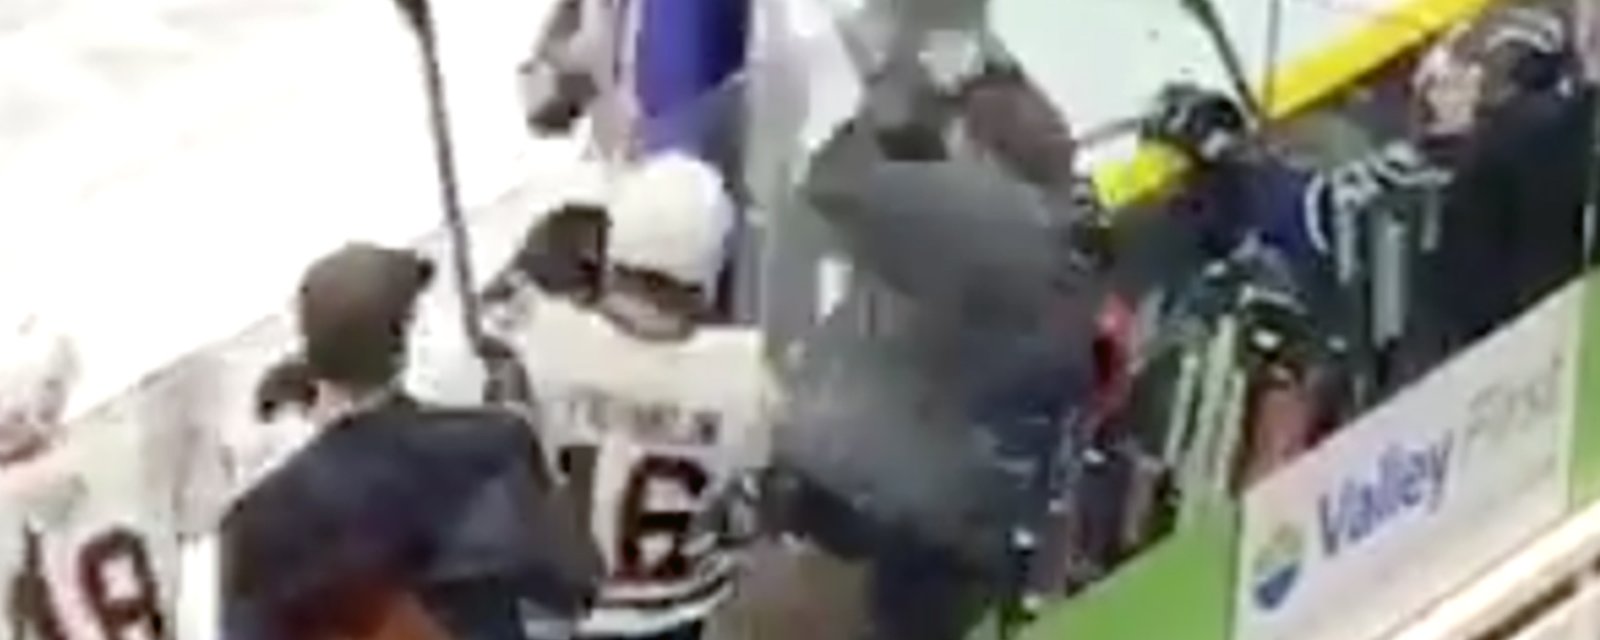 WHL player gets ejected from game for swinging stick at team trainer and smashing his glasses